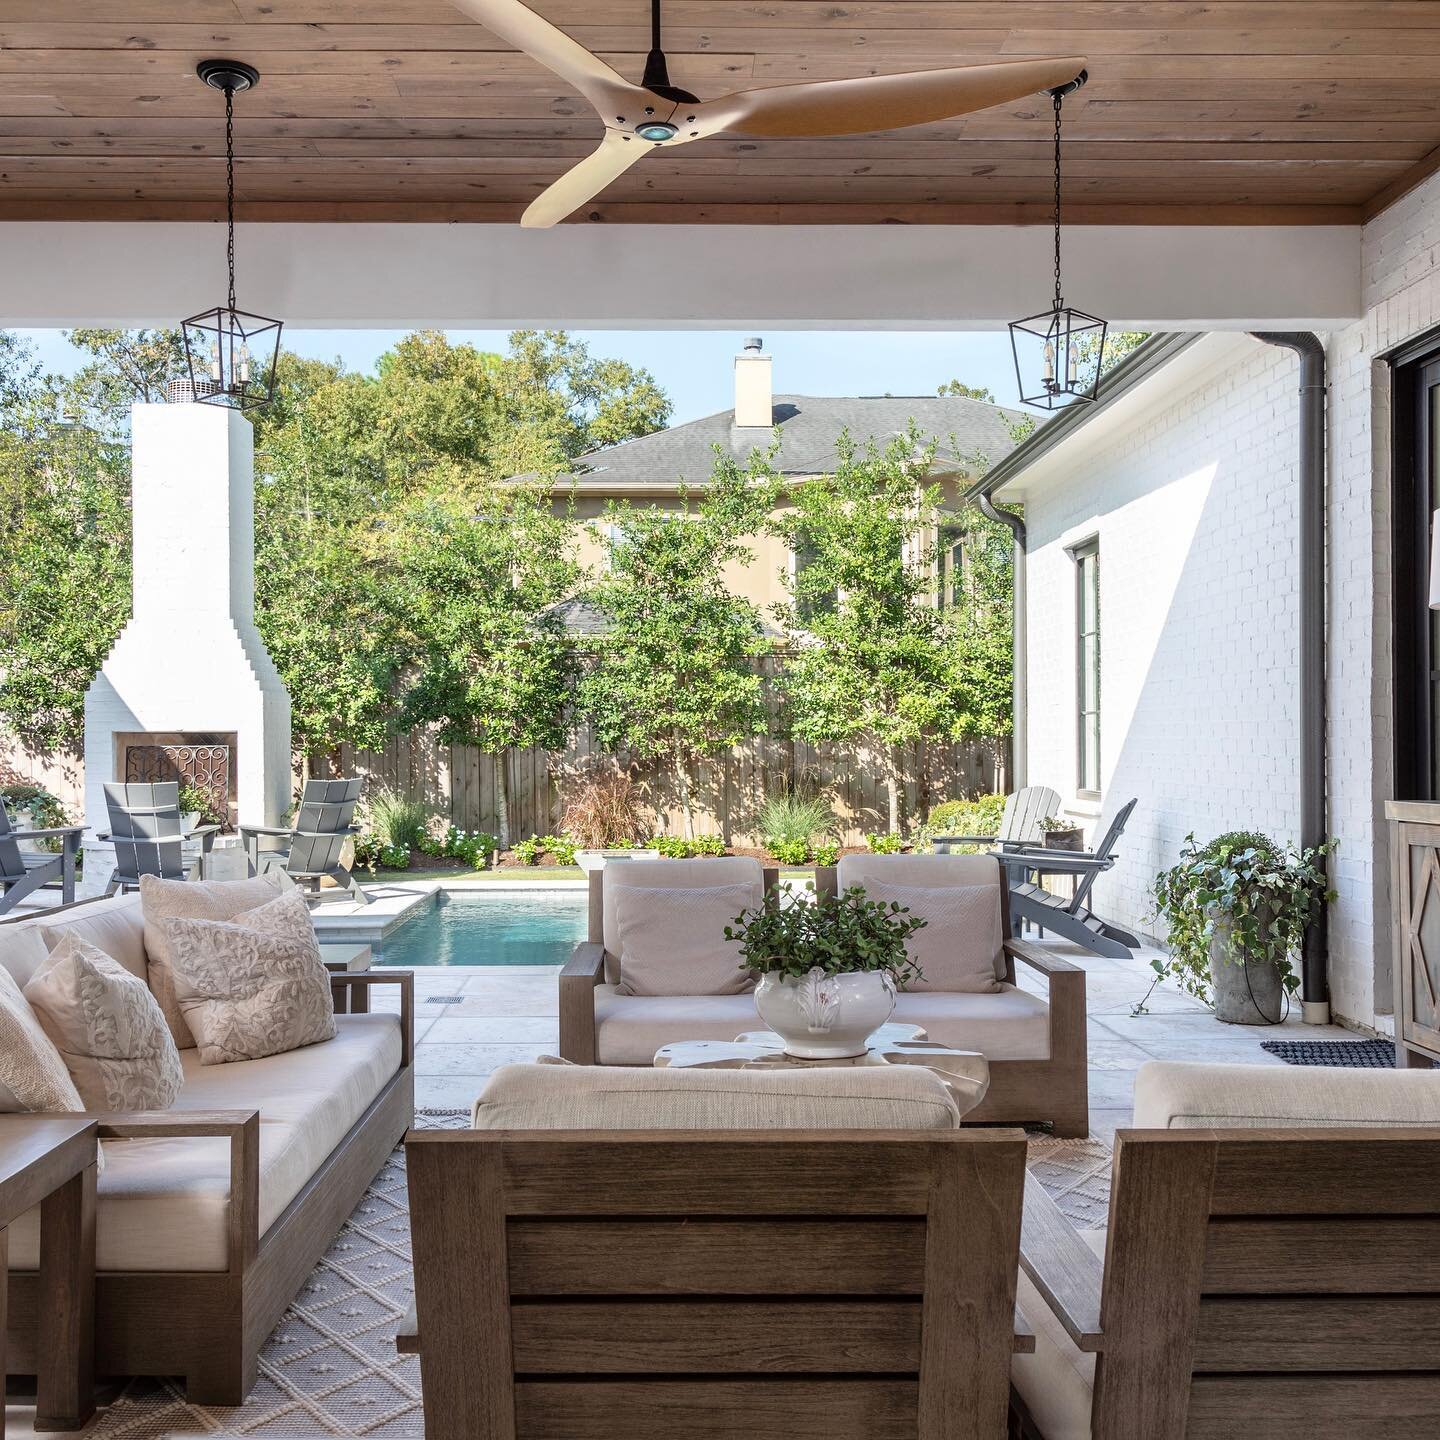 Things are not only Bigger in Texas but also Hotter! Hooray for covered outdoor spaces! A must in your new construction design.  @kerrykirkphoto @mmlighting 
.
.
.
.
.
.

#interiordesigner
designerfornewconstruction #interiordesignforrenovations
#int